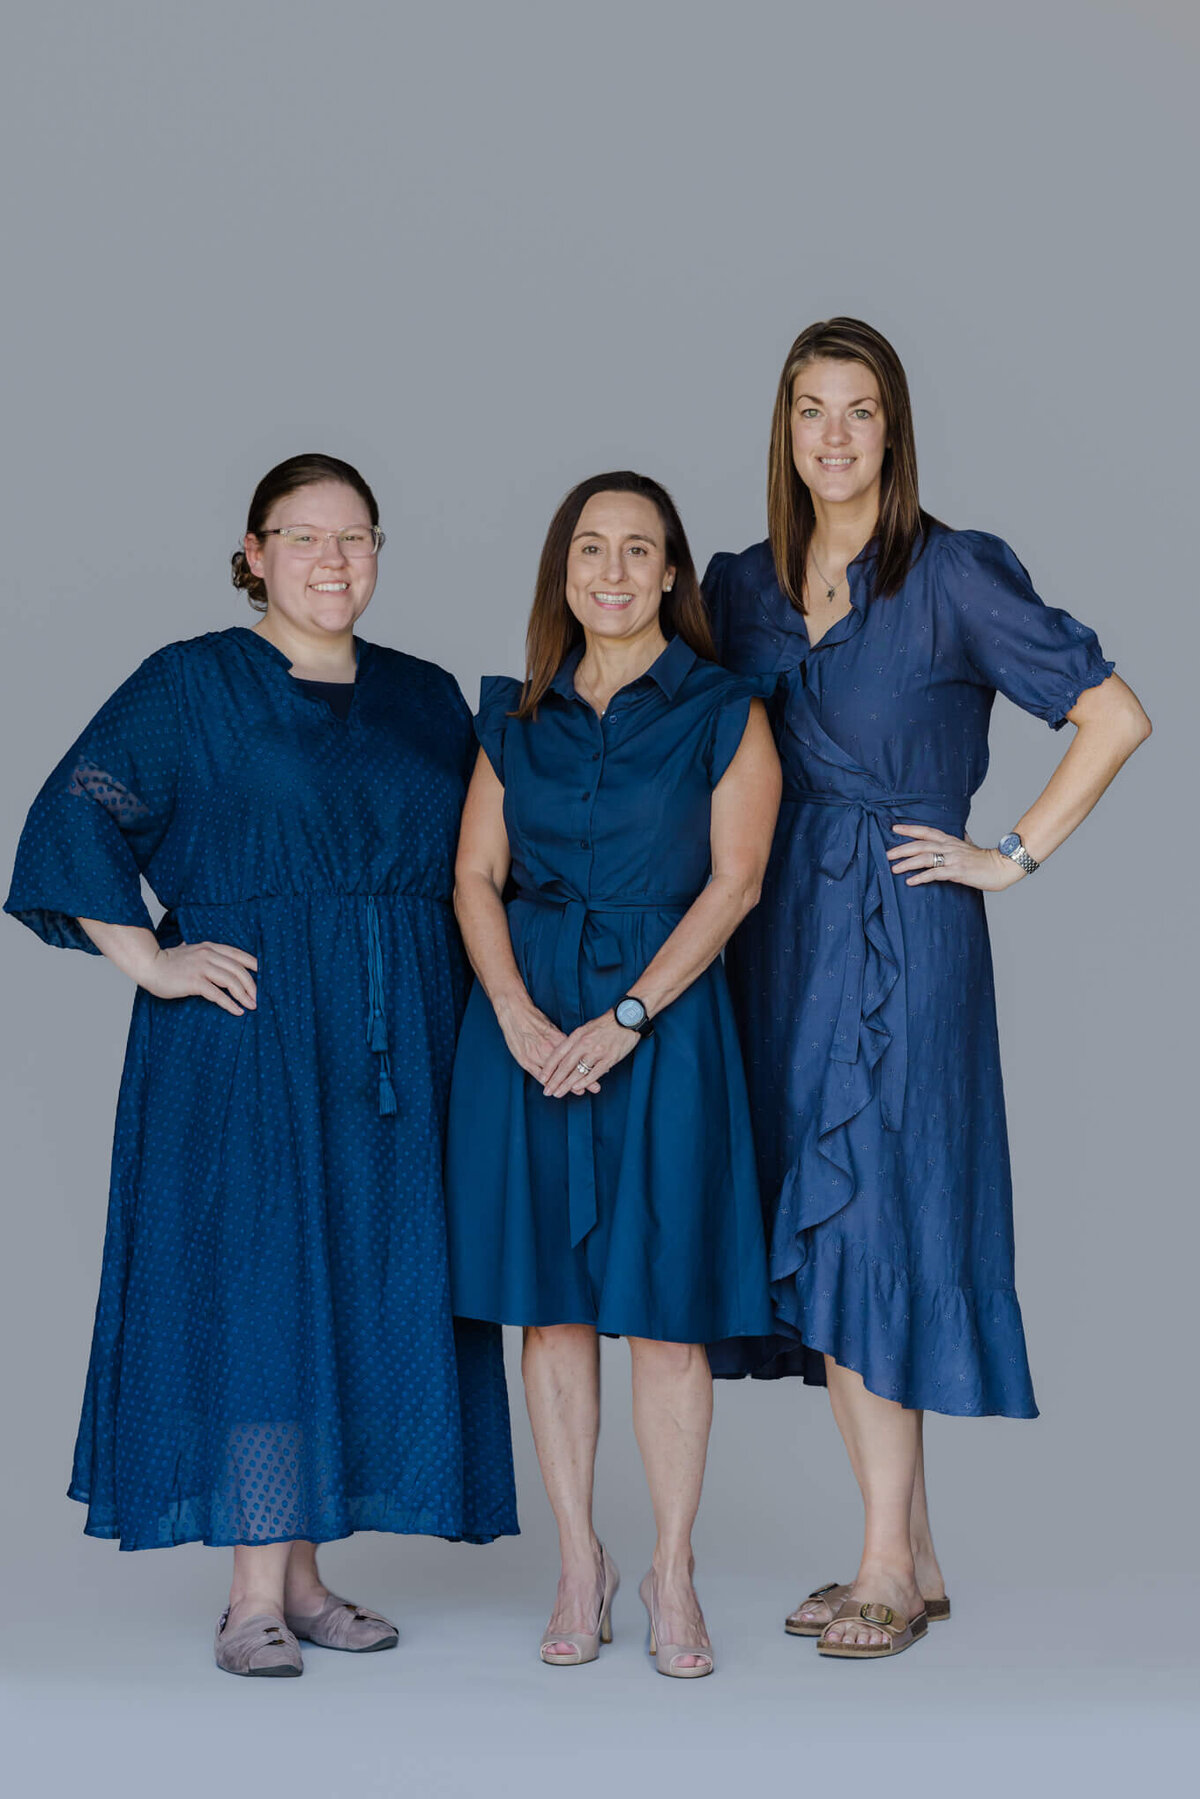 Group portrait of Longview, TX JBA Financial Services staff in navy blue dresses standing in front of light grey backdrop